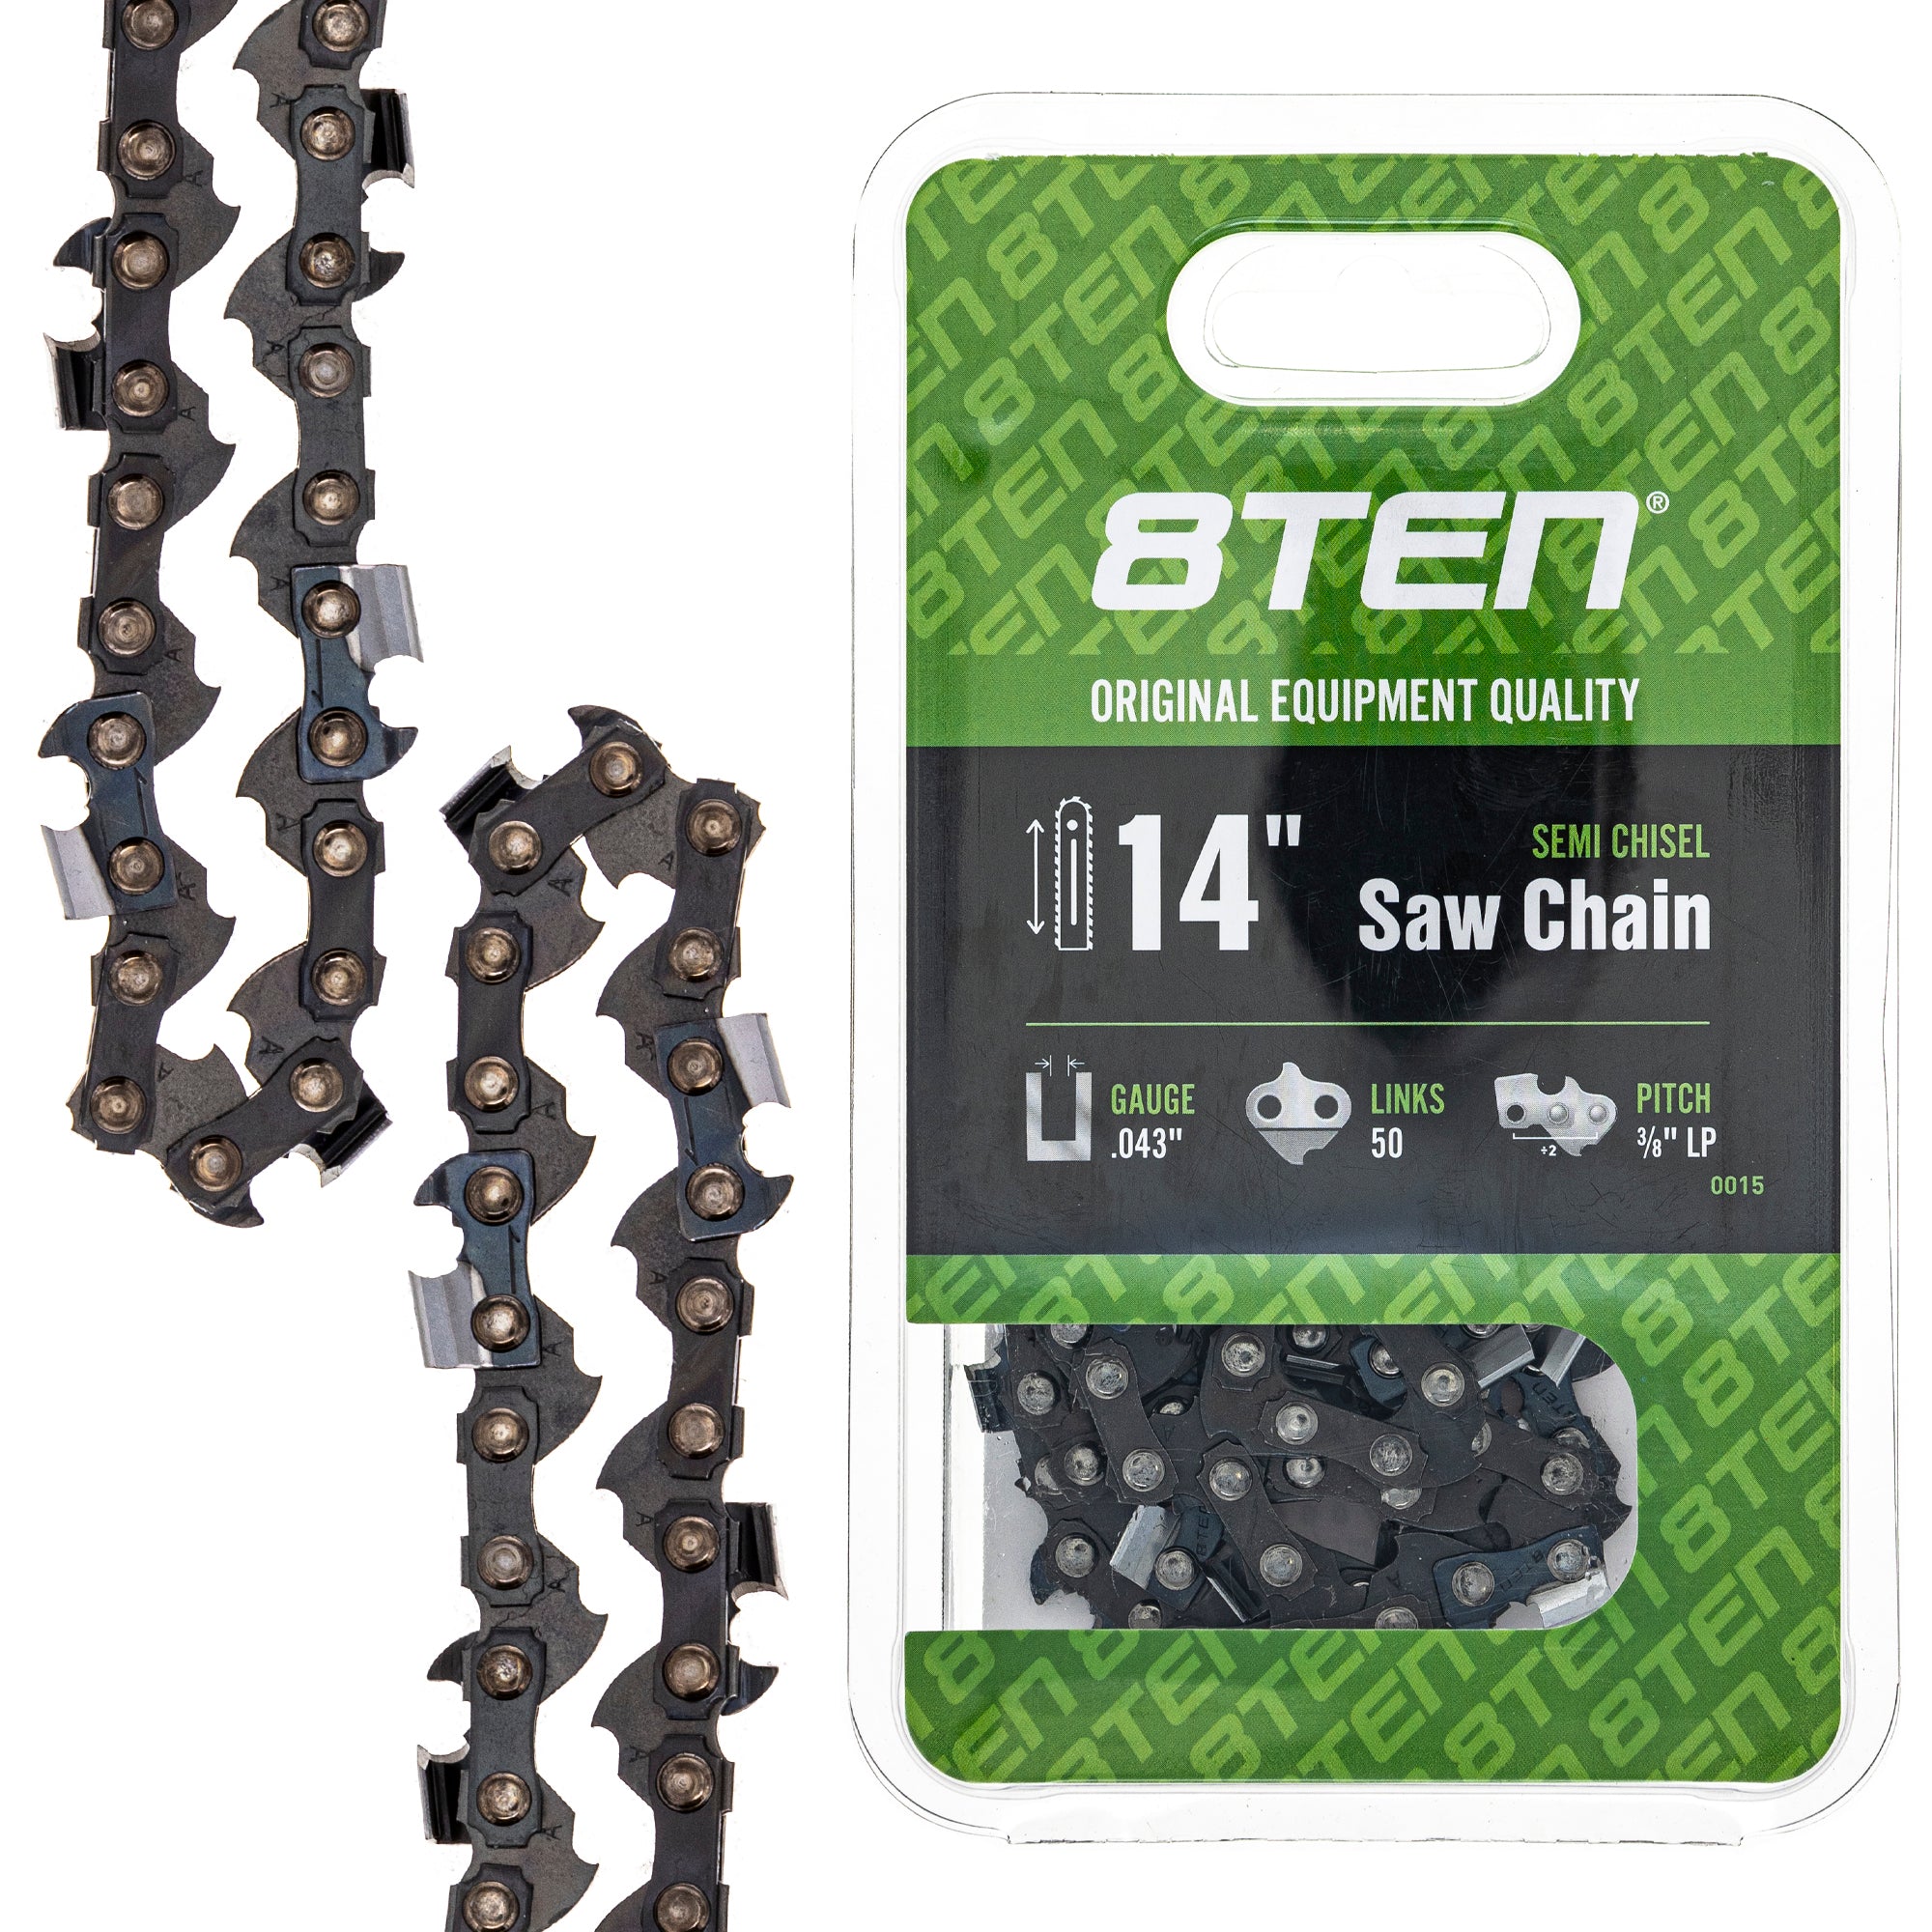 8TEN 810-CCC2237H Chain 4-Pack for zOTHER Stens Oregon Carlton MSE